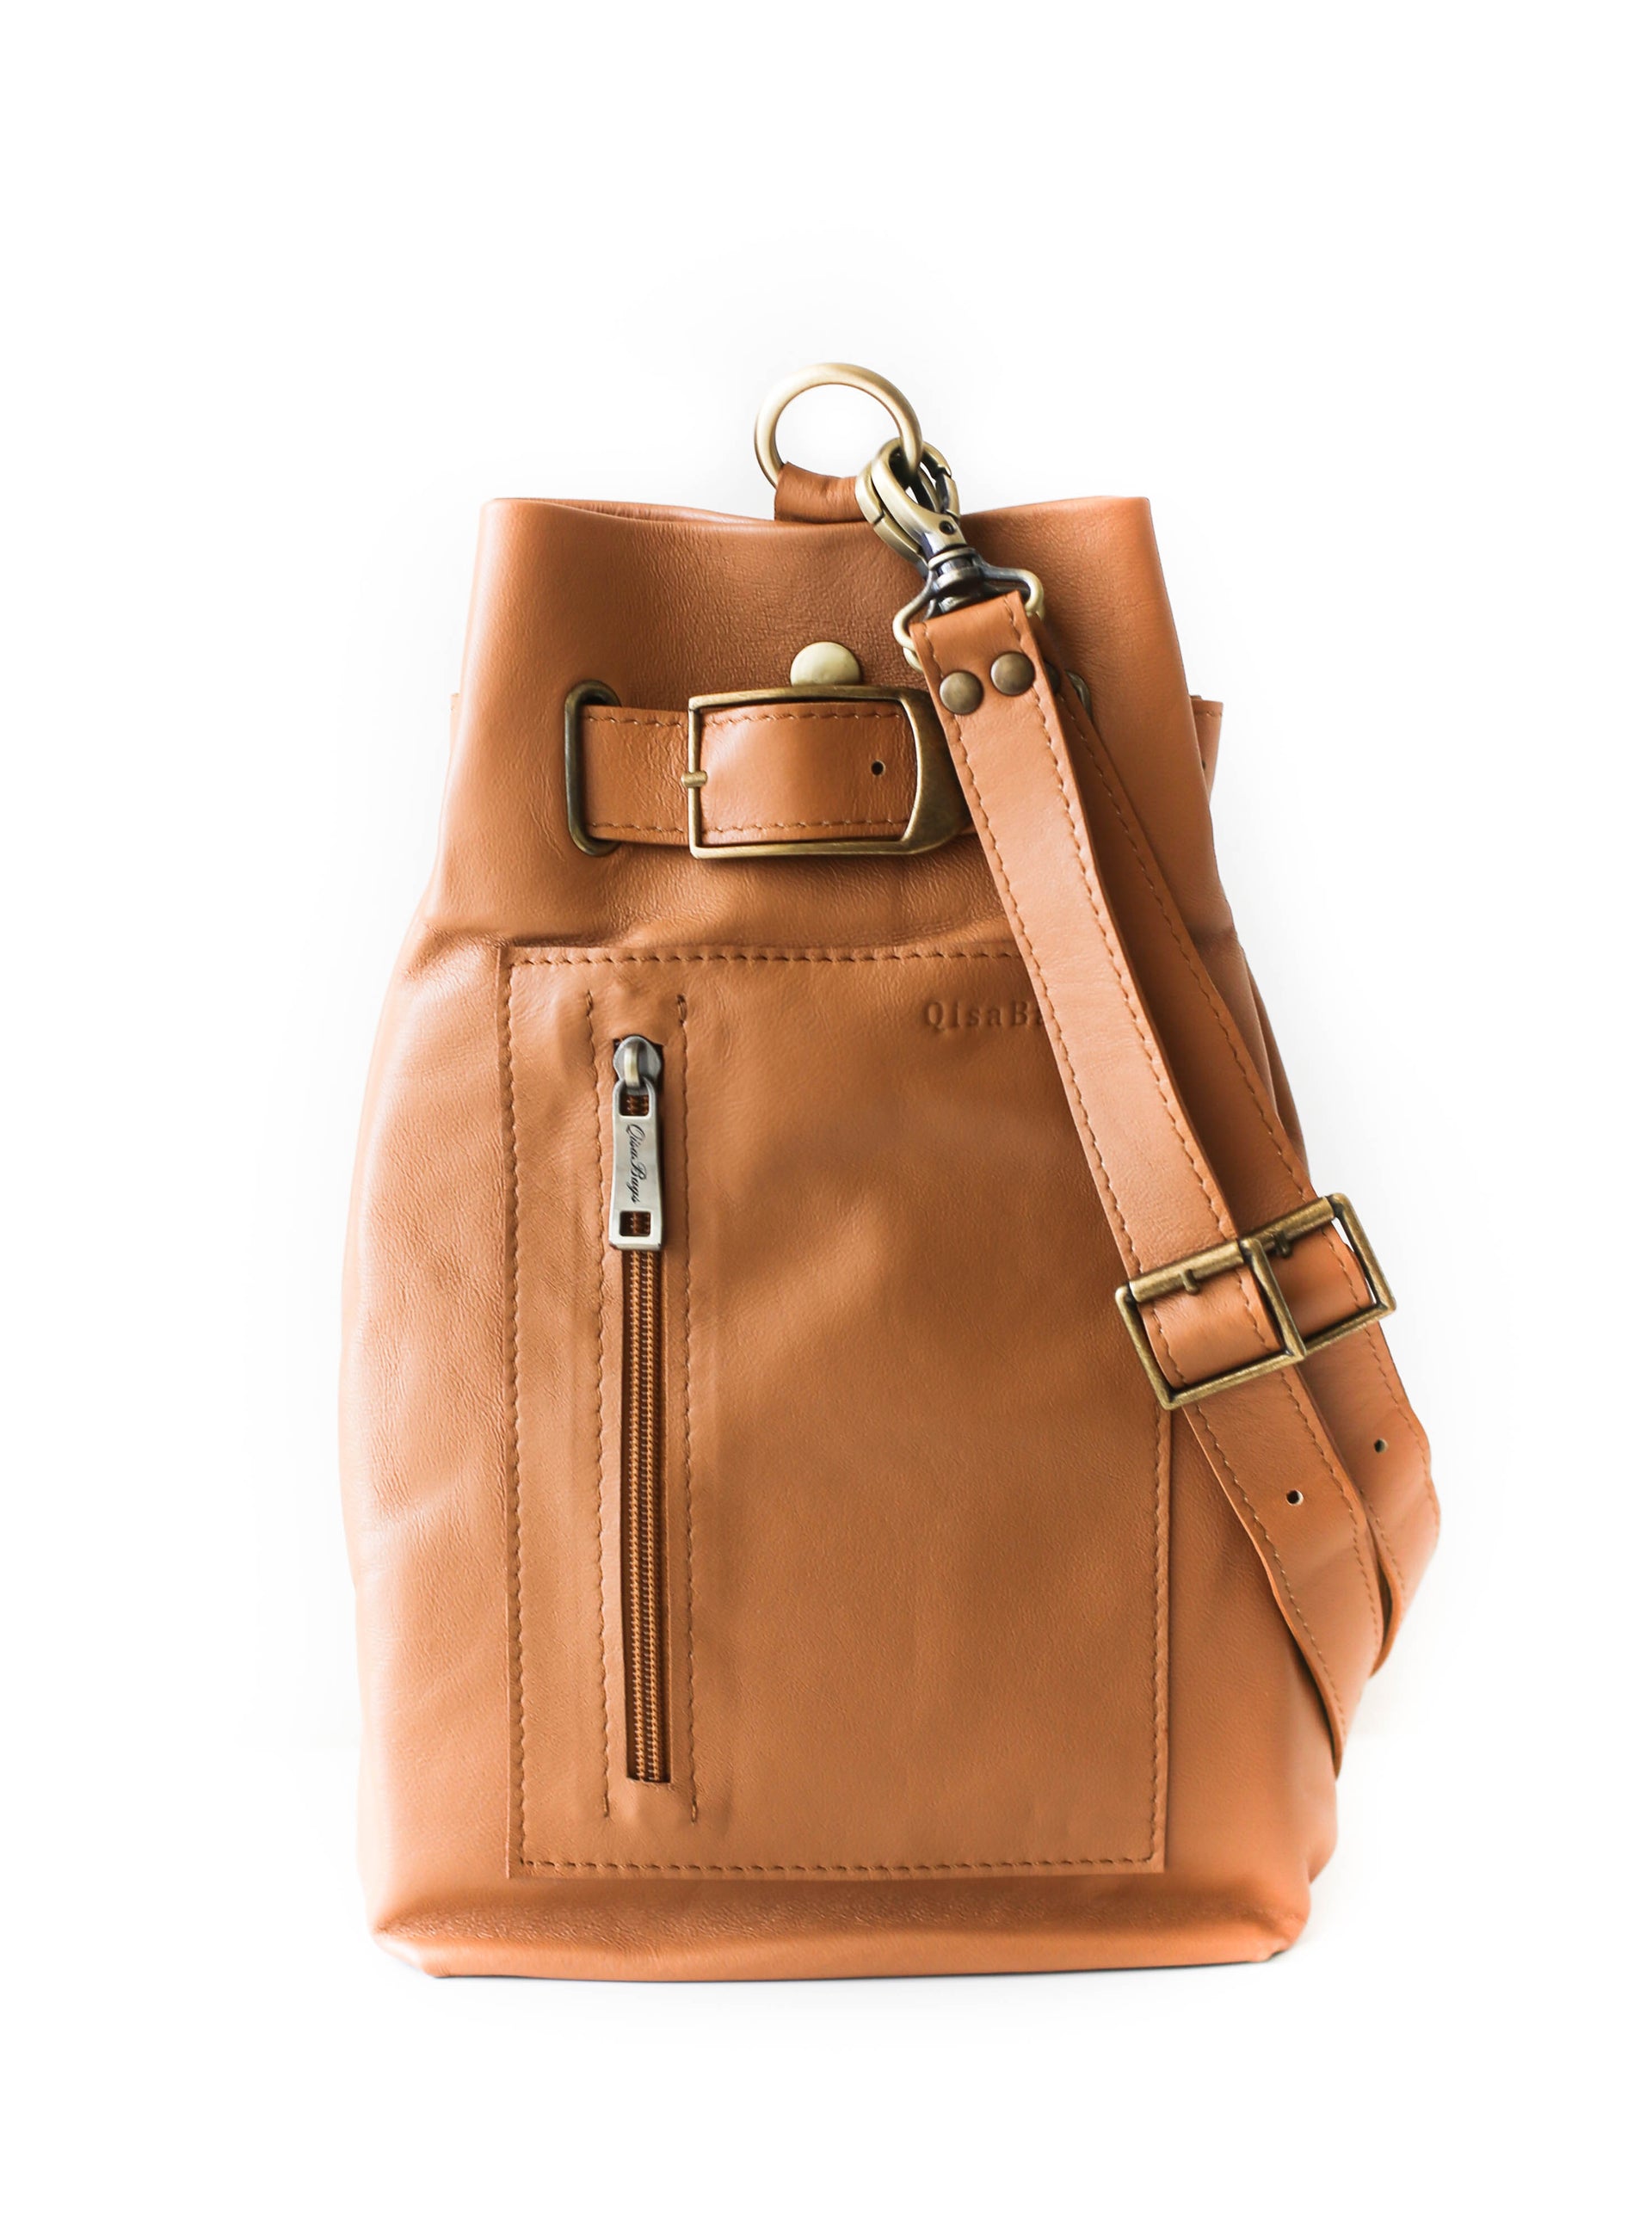 Women's Brown Leather Sling Bag